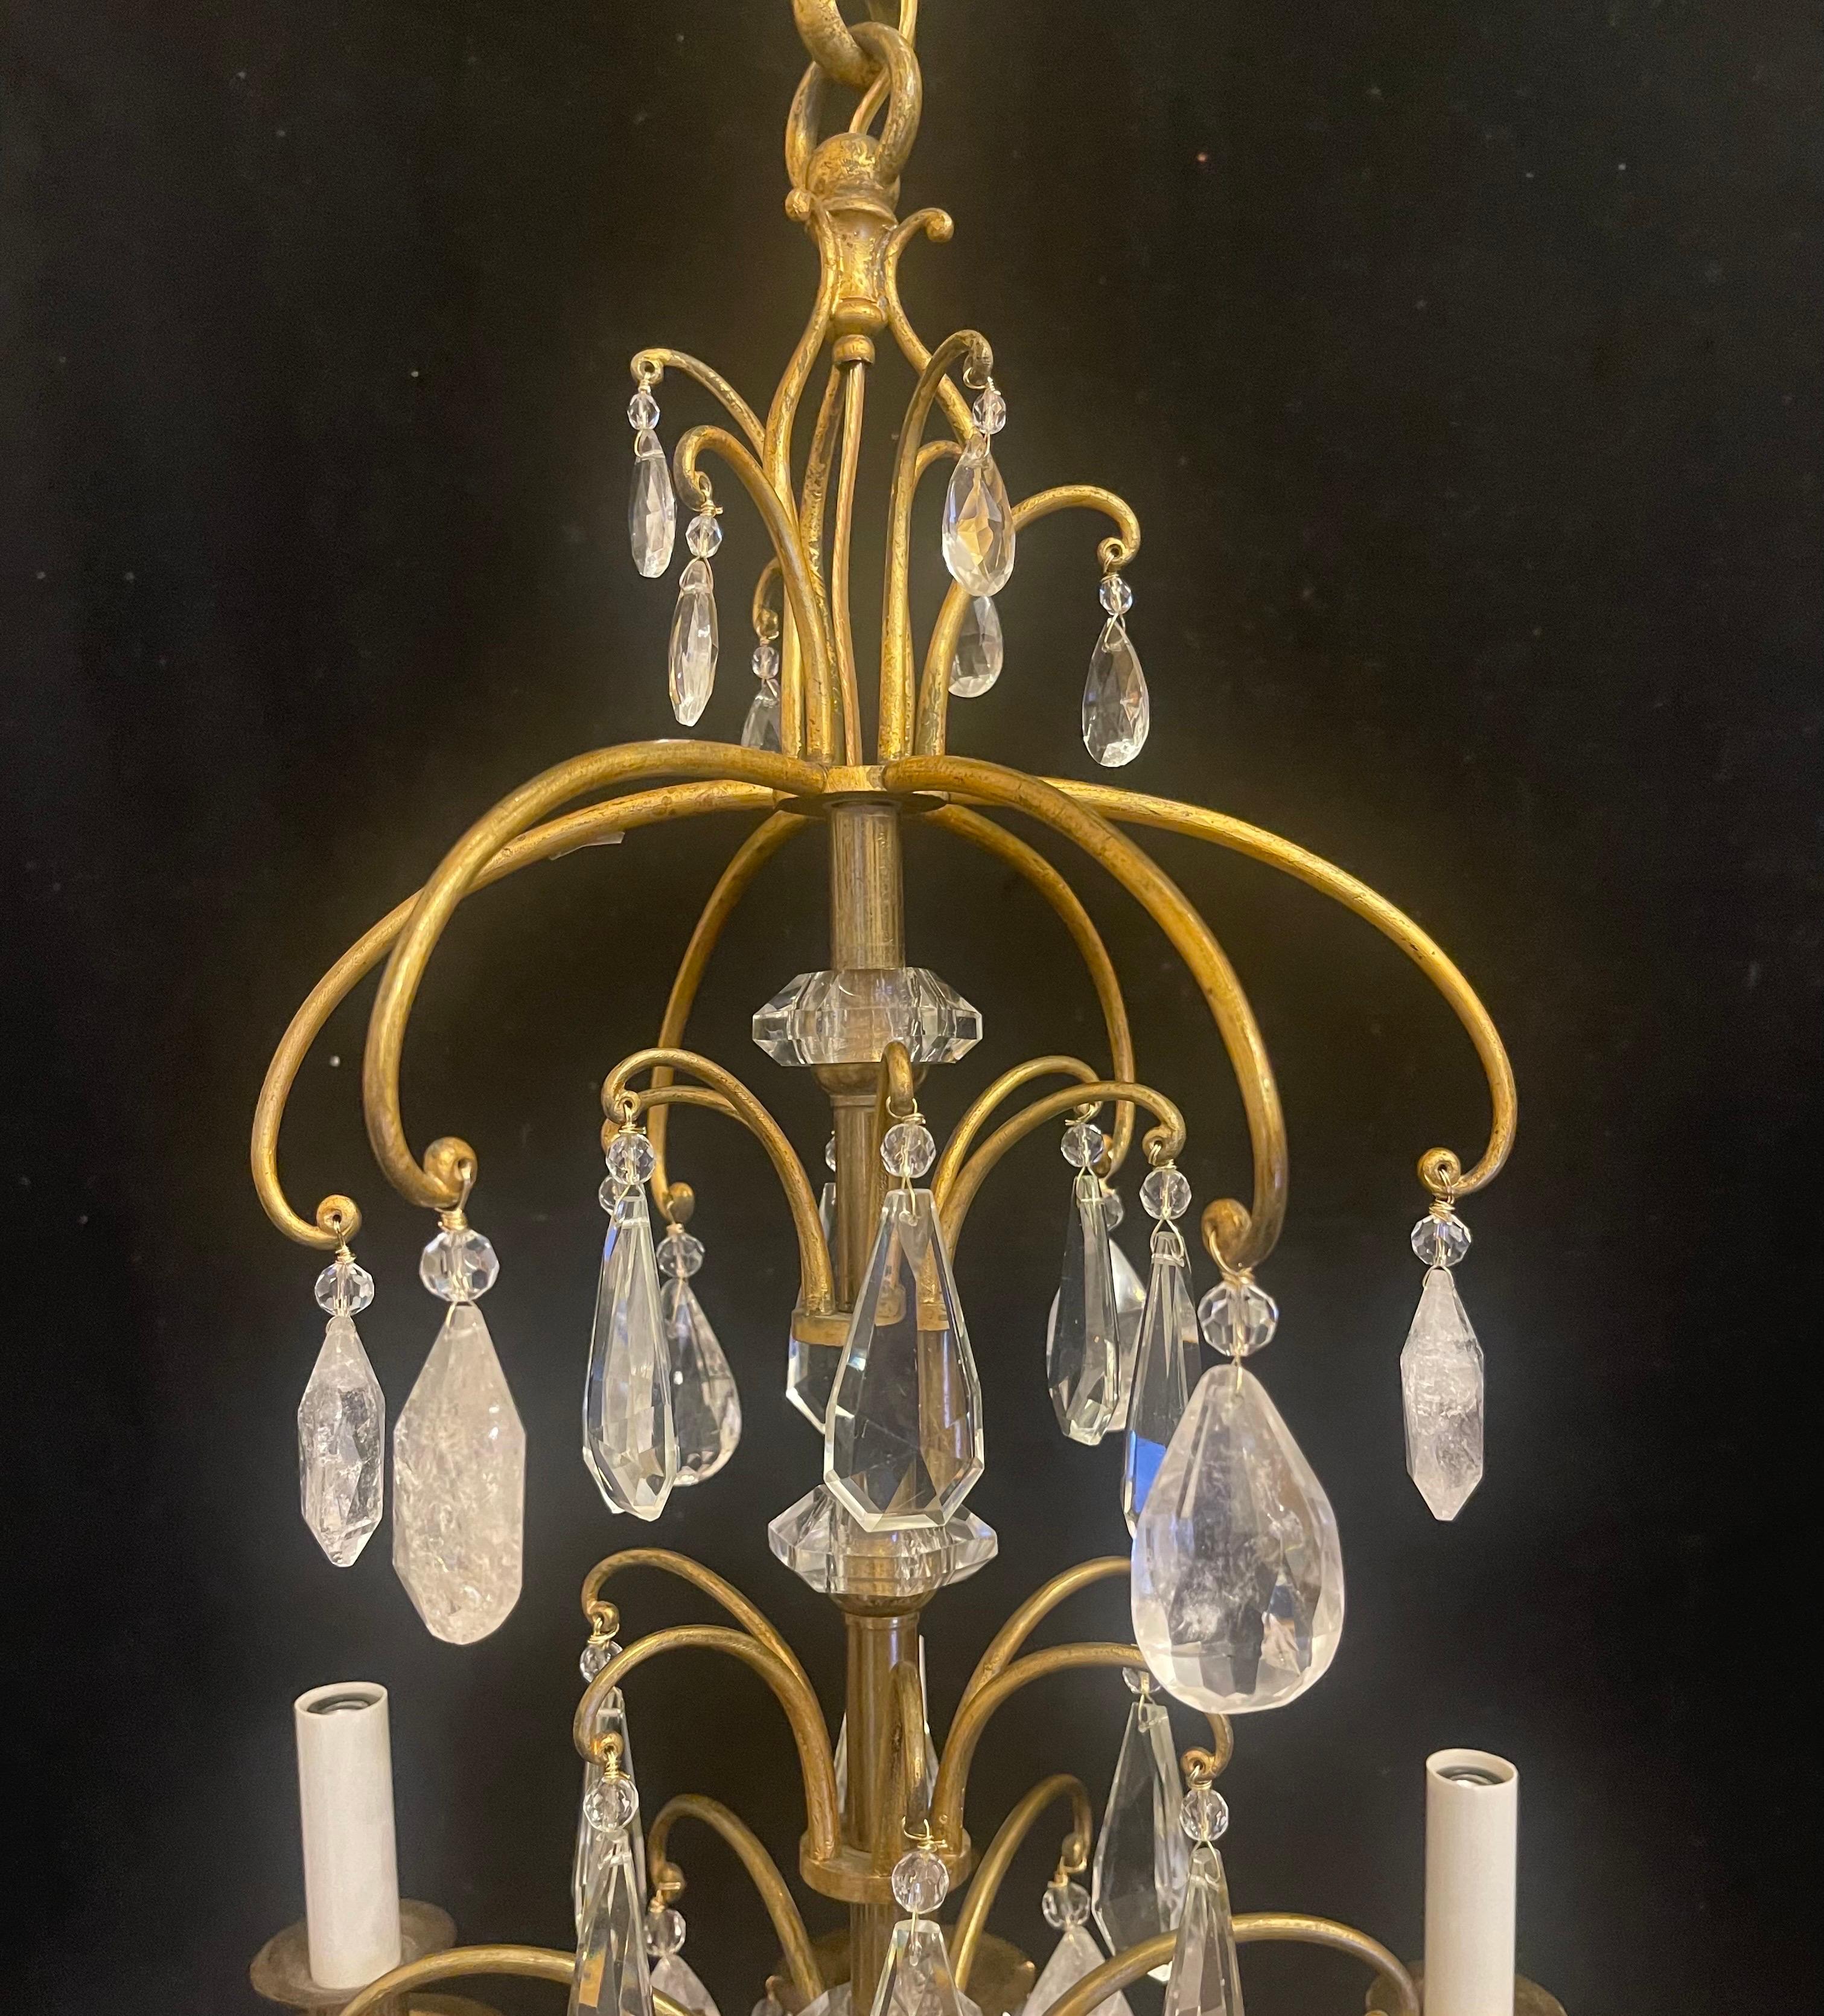 A Wonderful French Bronze Maison Bagues Style Rock Crystal And Alternating Crystal 6 Light Chandelier Completely Rewired And Ready To Hang With Chain Canopy And Mounting Hardware.